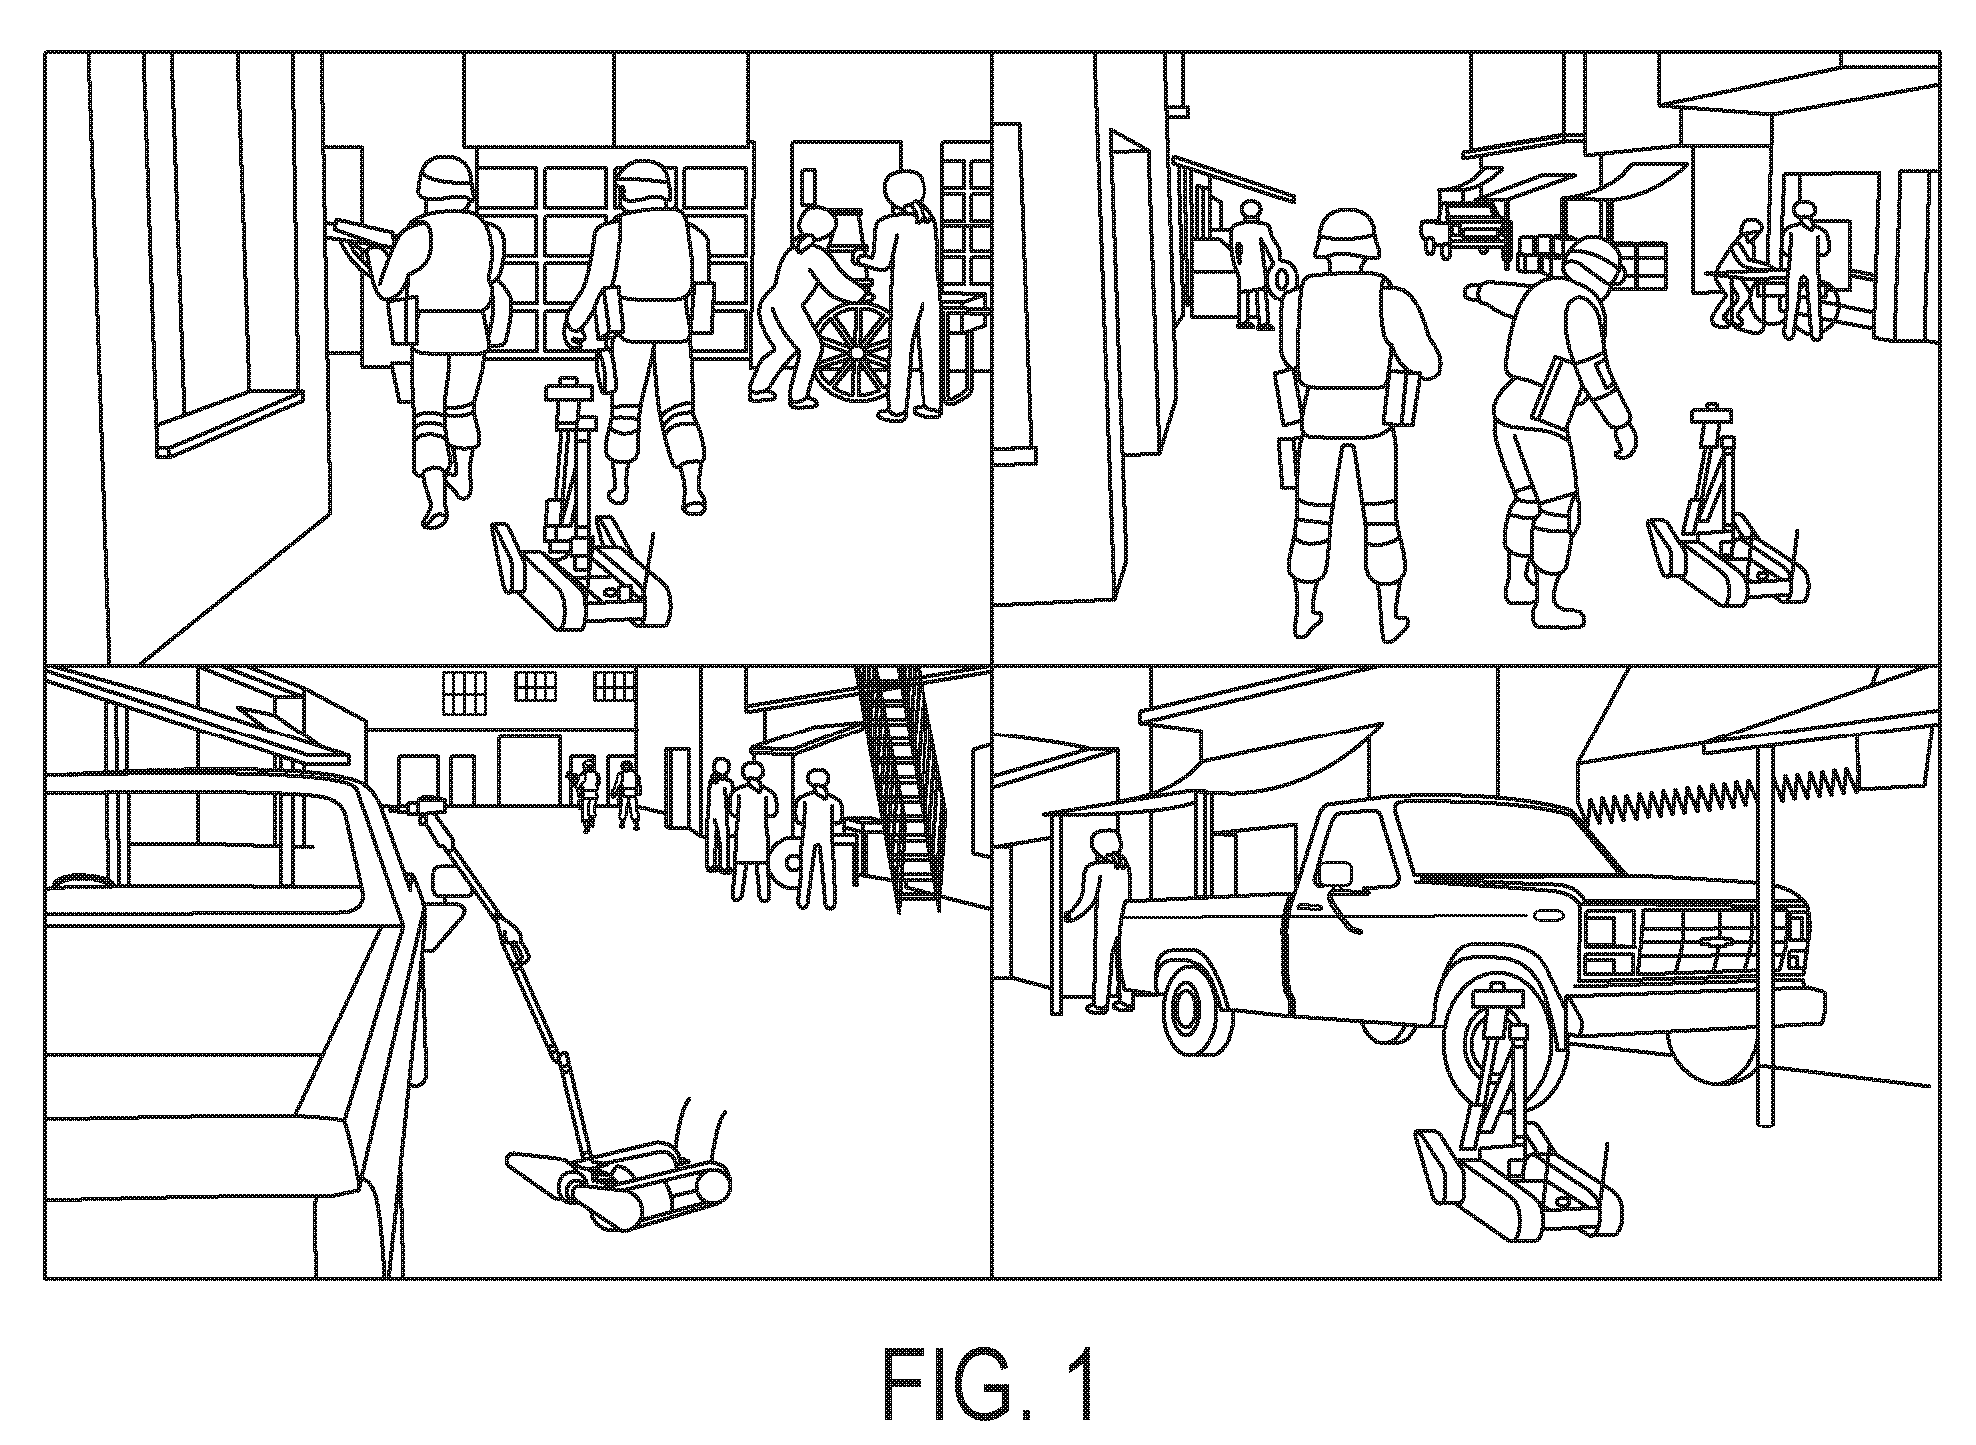 System and Method for Cooperative Remote Vehicle Behavior